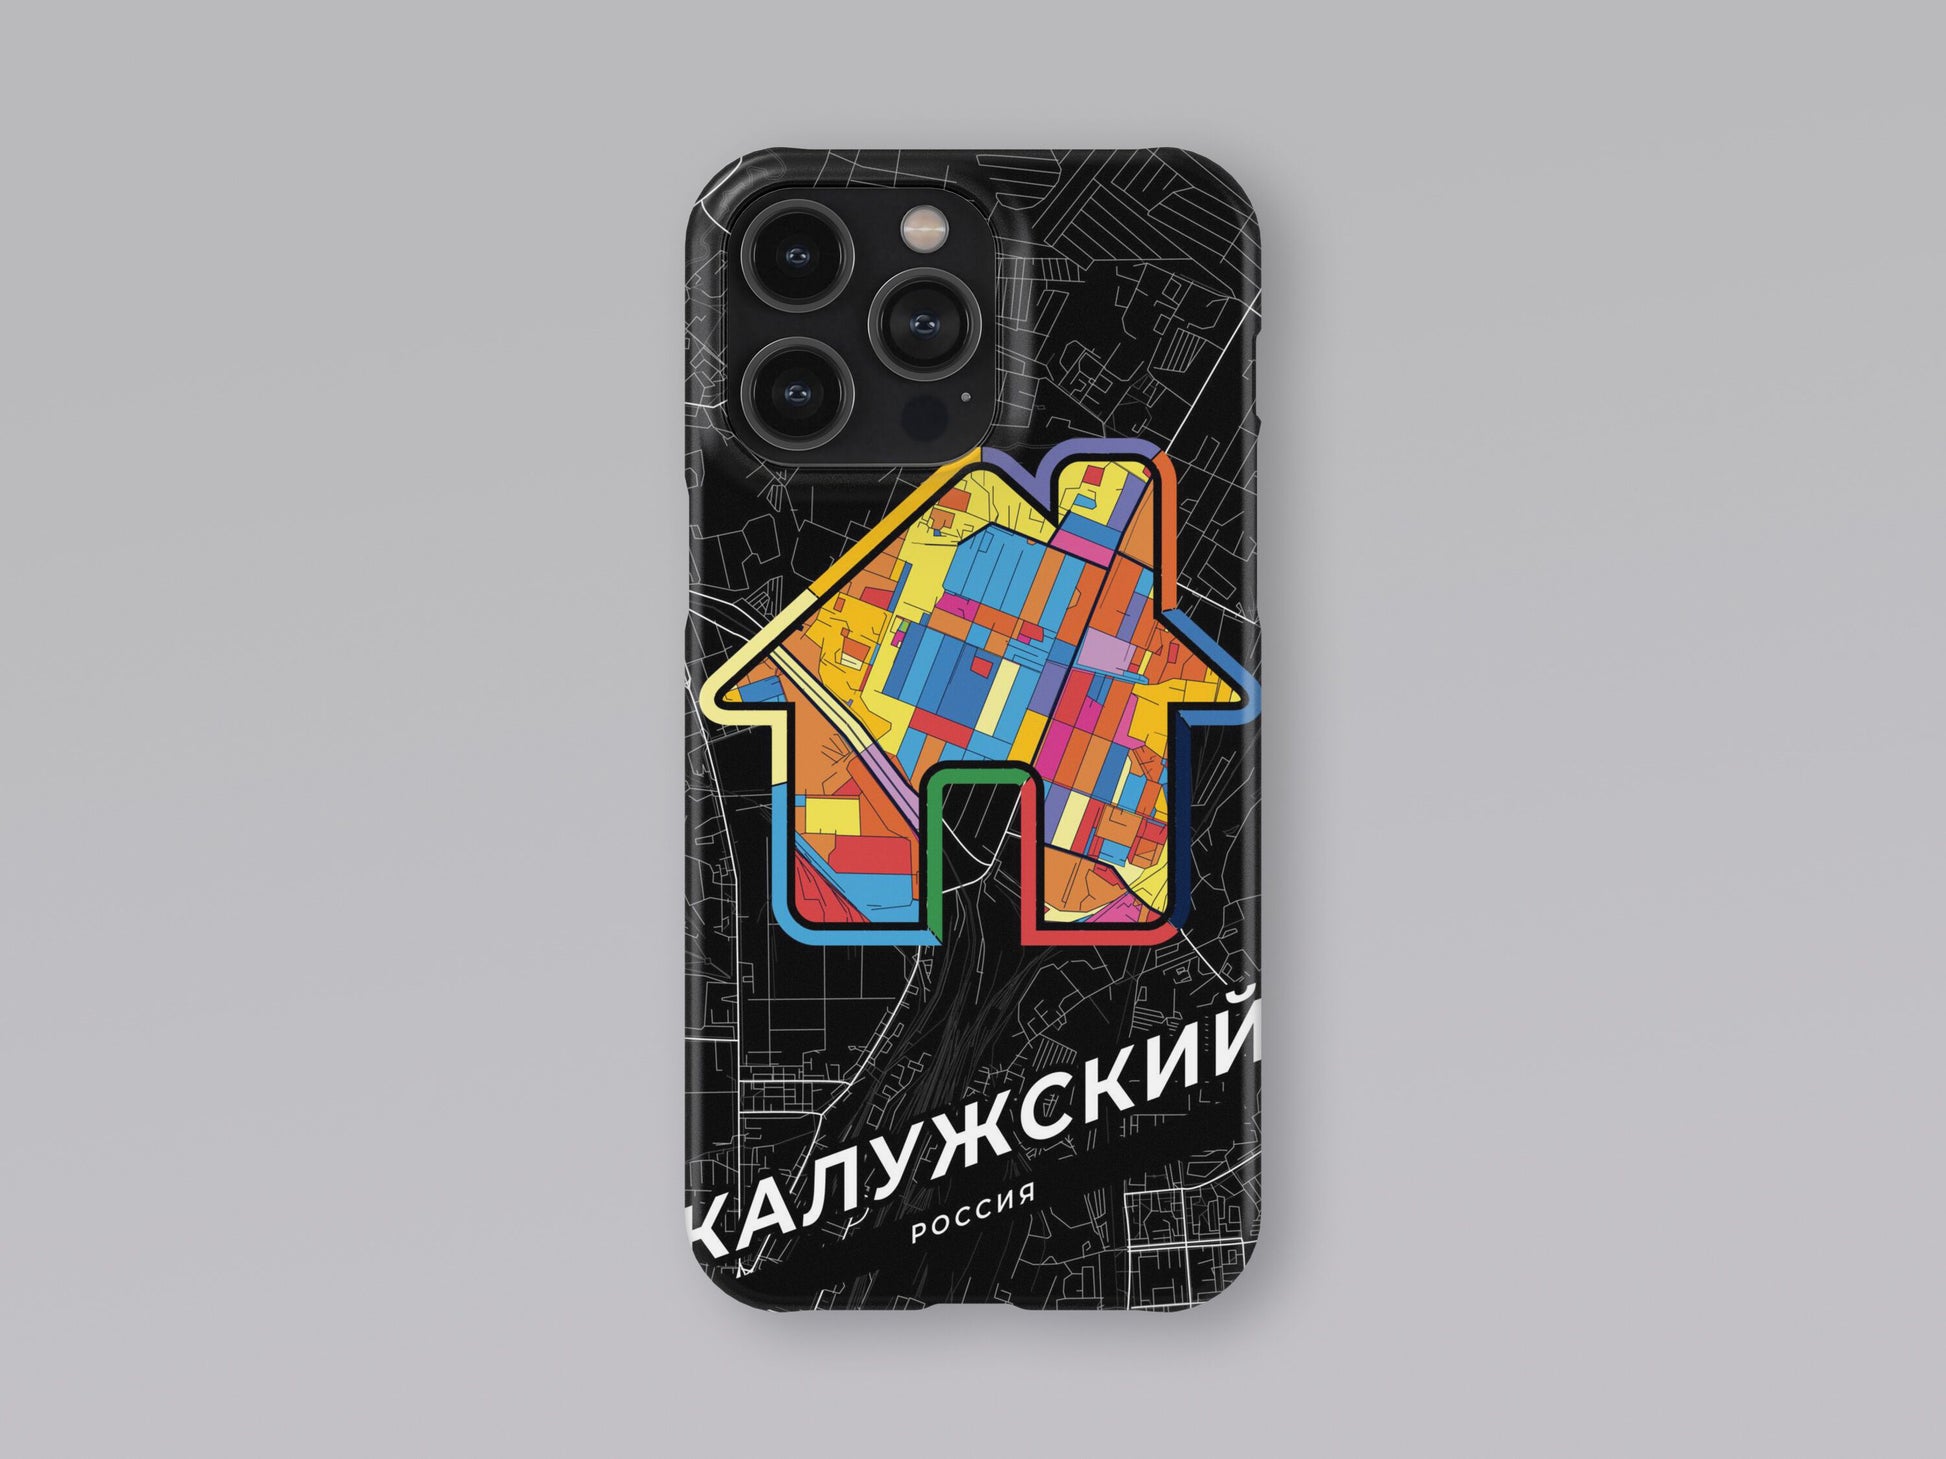 Kaluga Russia slim phone case with colorful icon. Birthday, wedding or housewarming gift. Couple match cases. 3